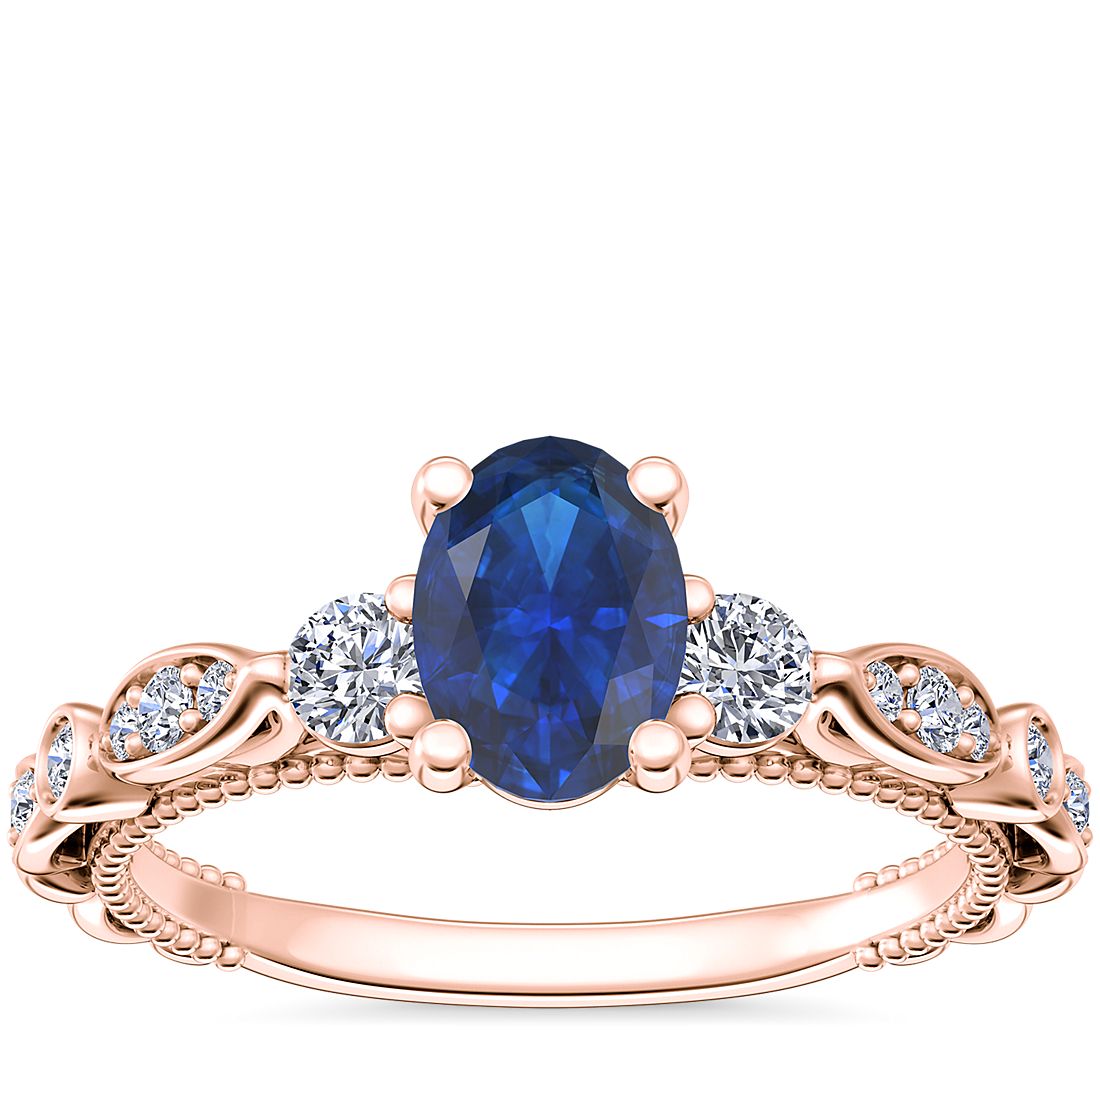 Floral Ellipse Diamond Cathedral Engagement Ring with Oval Sapphire in 14k Rose Gold (7x5mm)